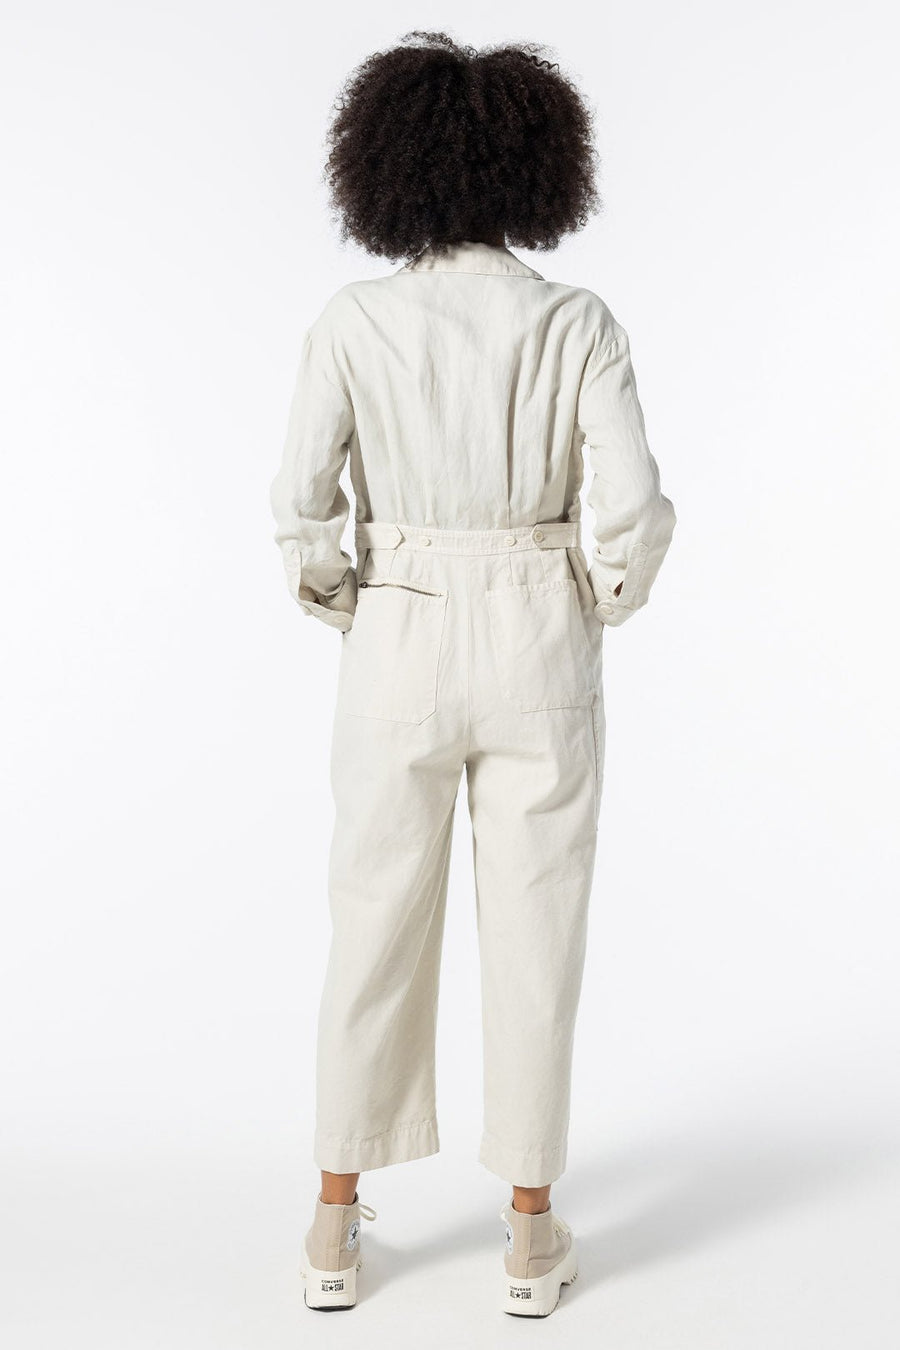 JEREMY COVERALL, GESSO - Burning Torch Online Boutique